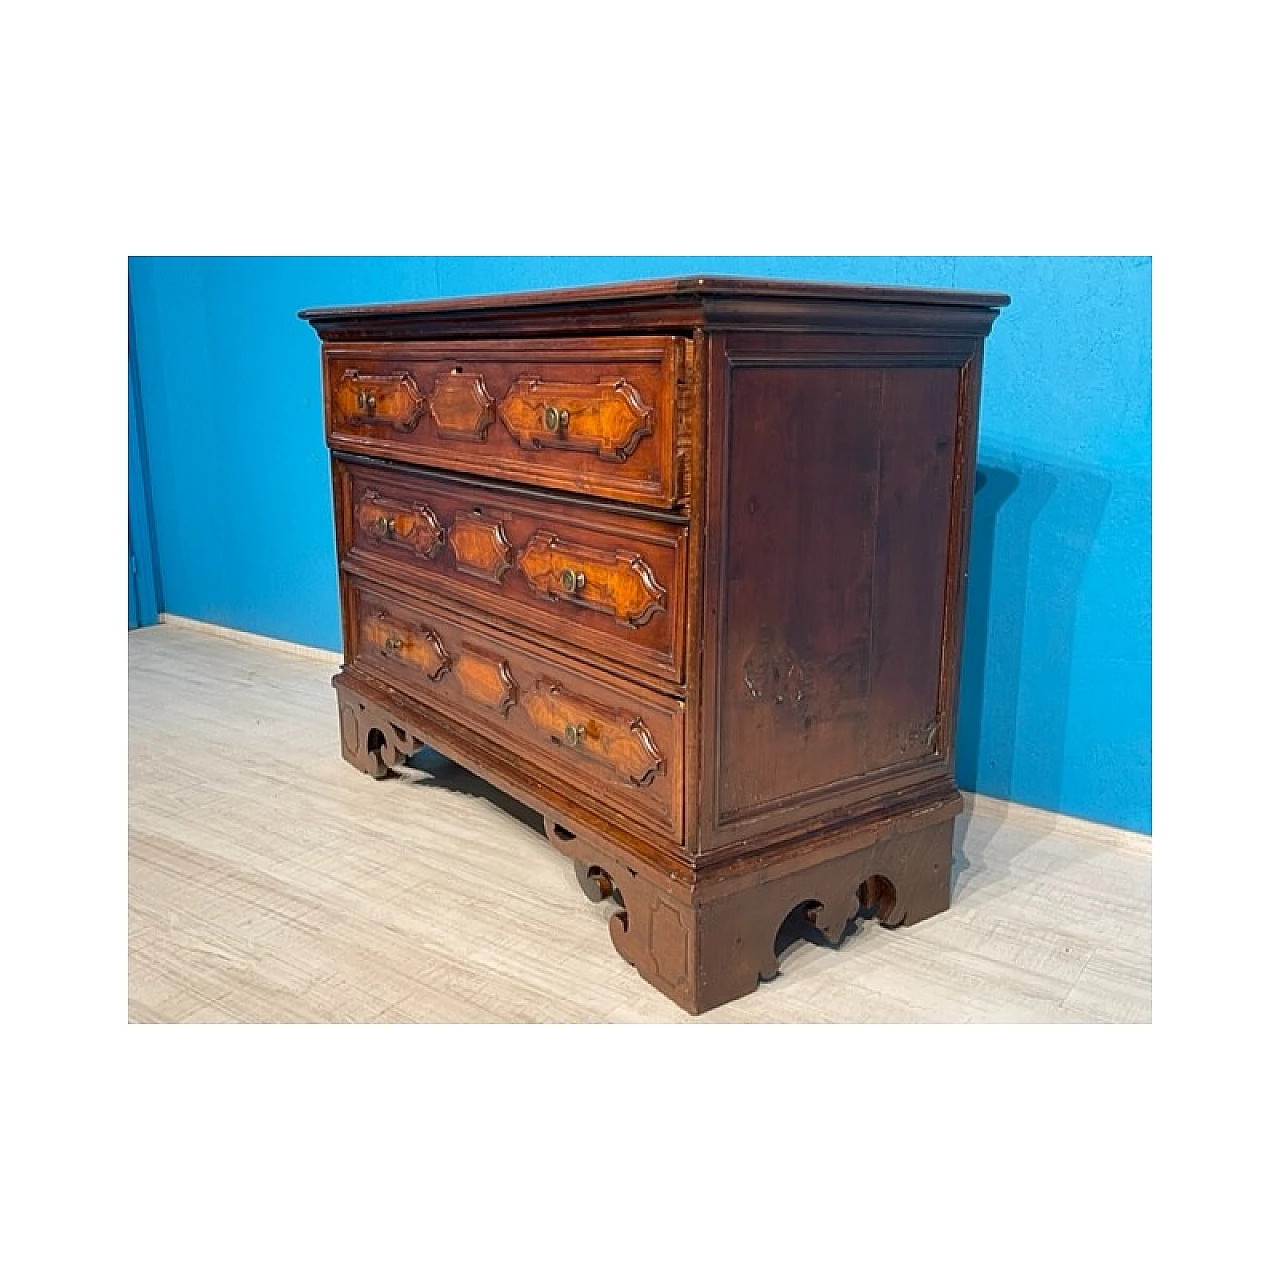 Lombardy chest of drawers in cherry wood, late 18th century 3